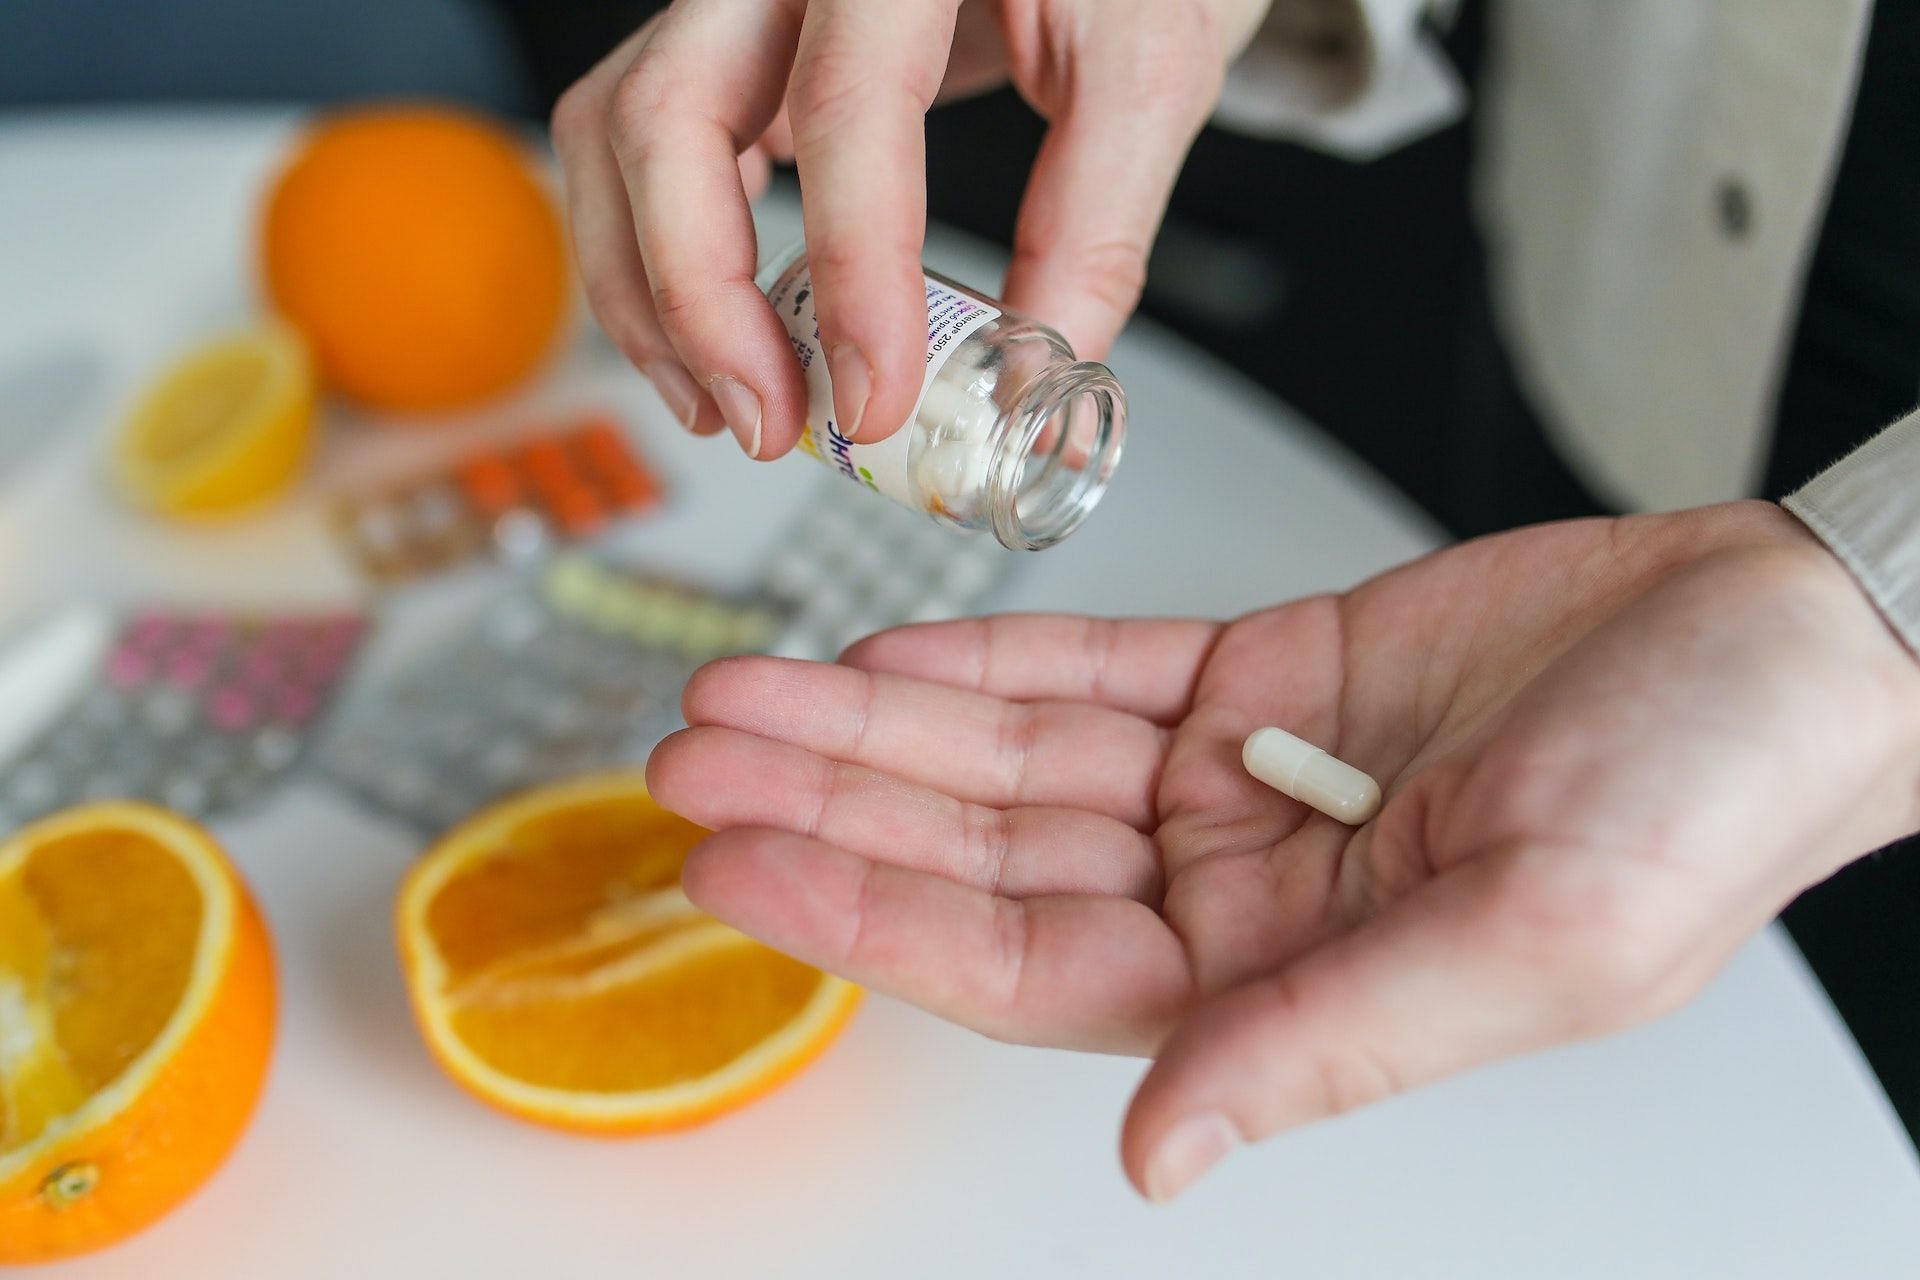 There are several benefits of magnesium supplements. (Photo via Pexels/Polina Tankilevitch)